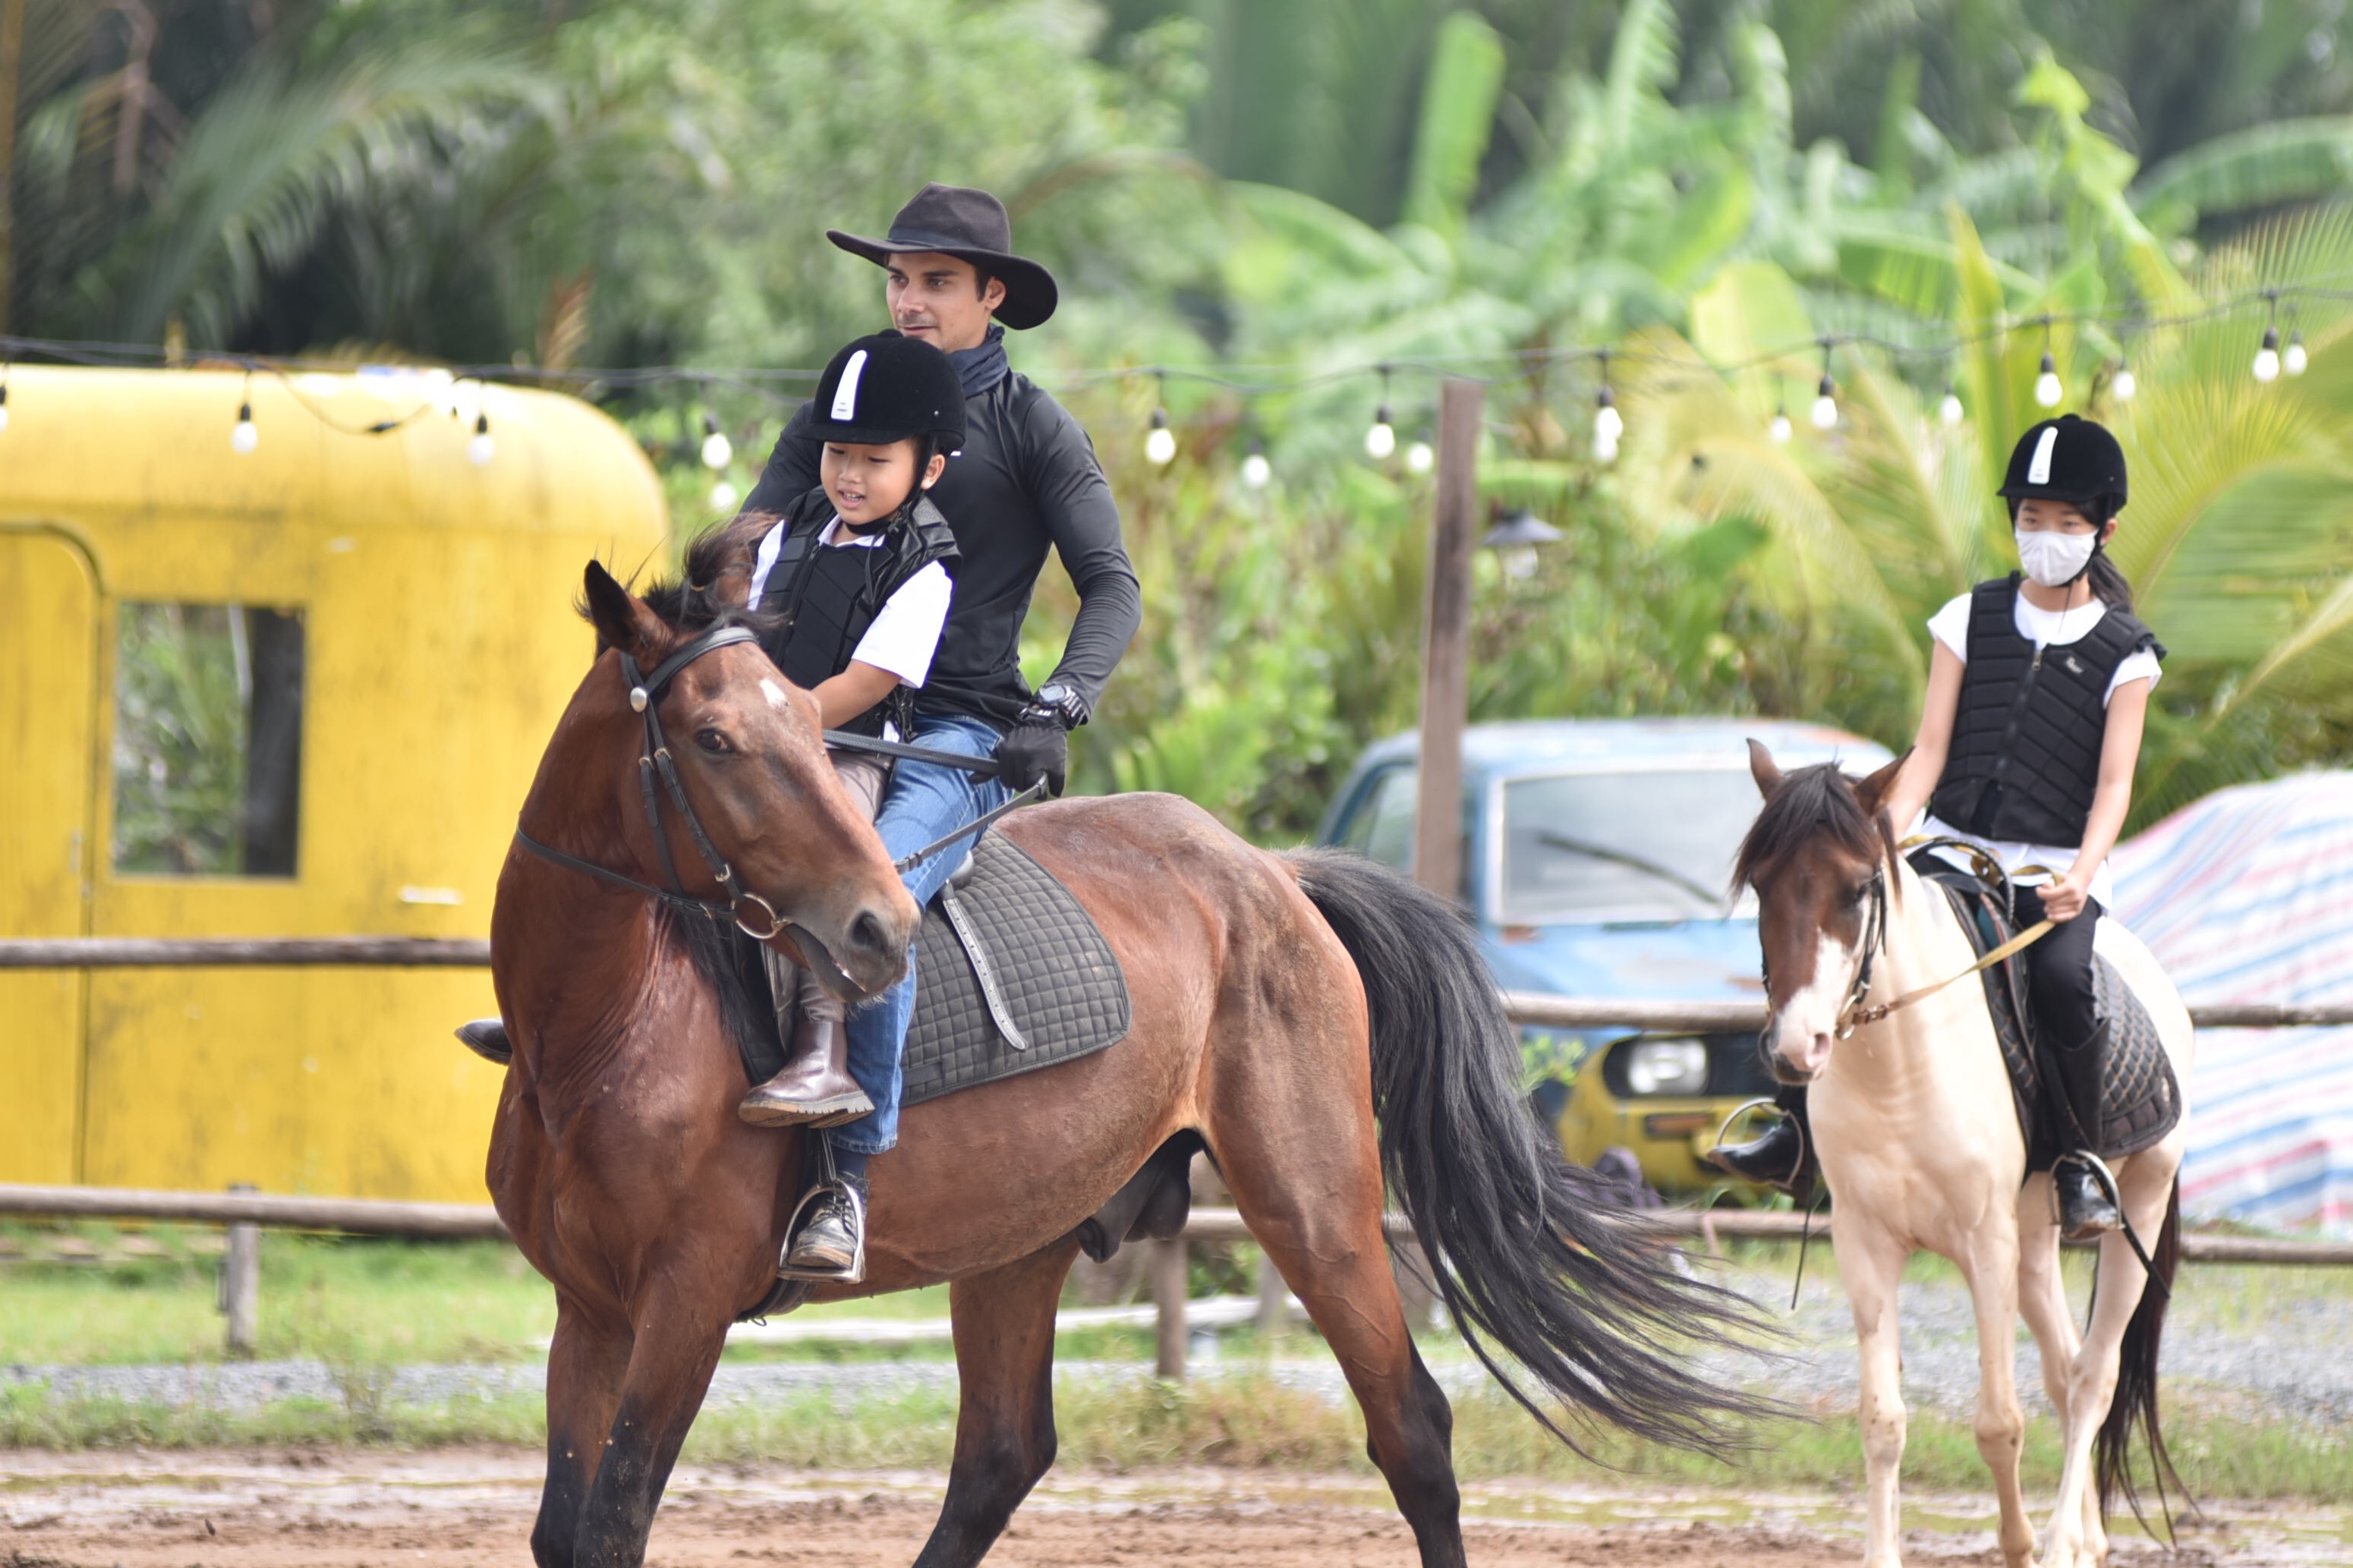 Horseback riding is one of Ho Chi Minh City’s newest weekend activities